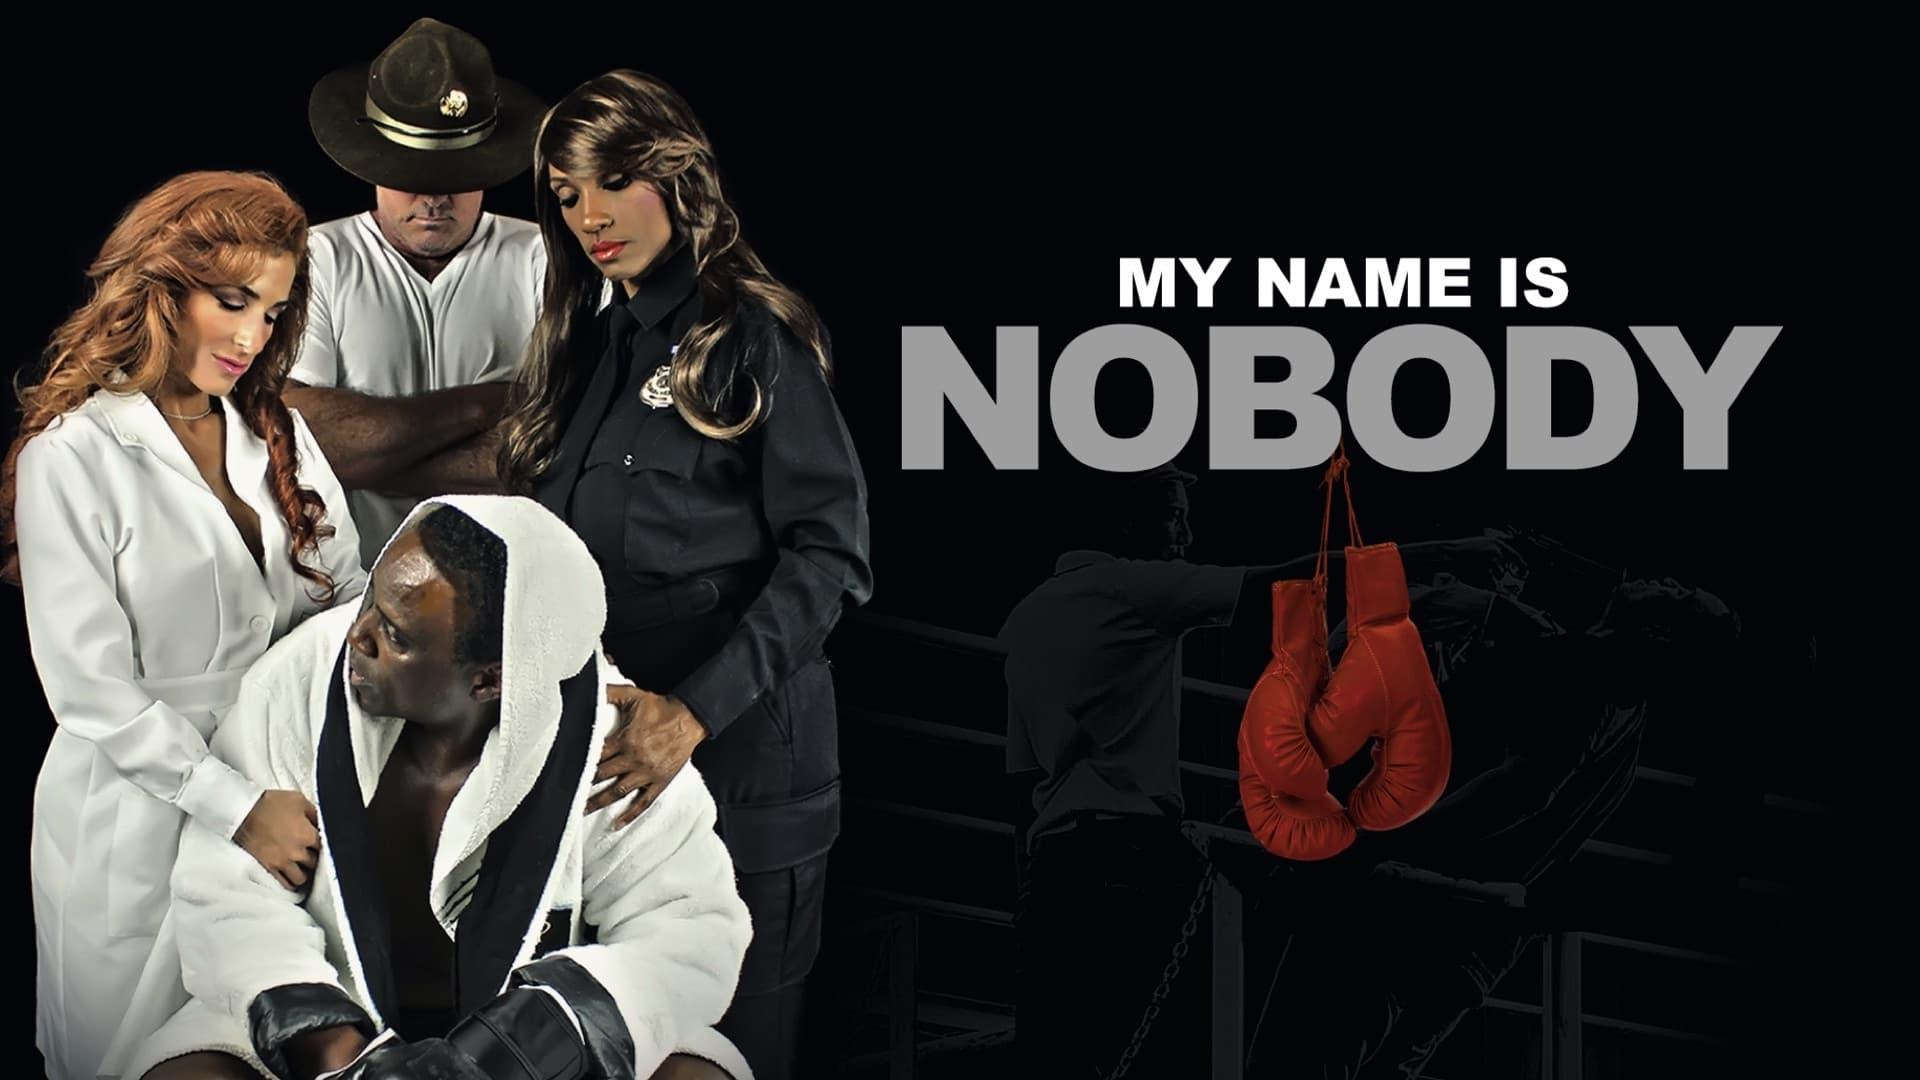 My Name is Nobody backdrop